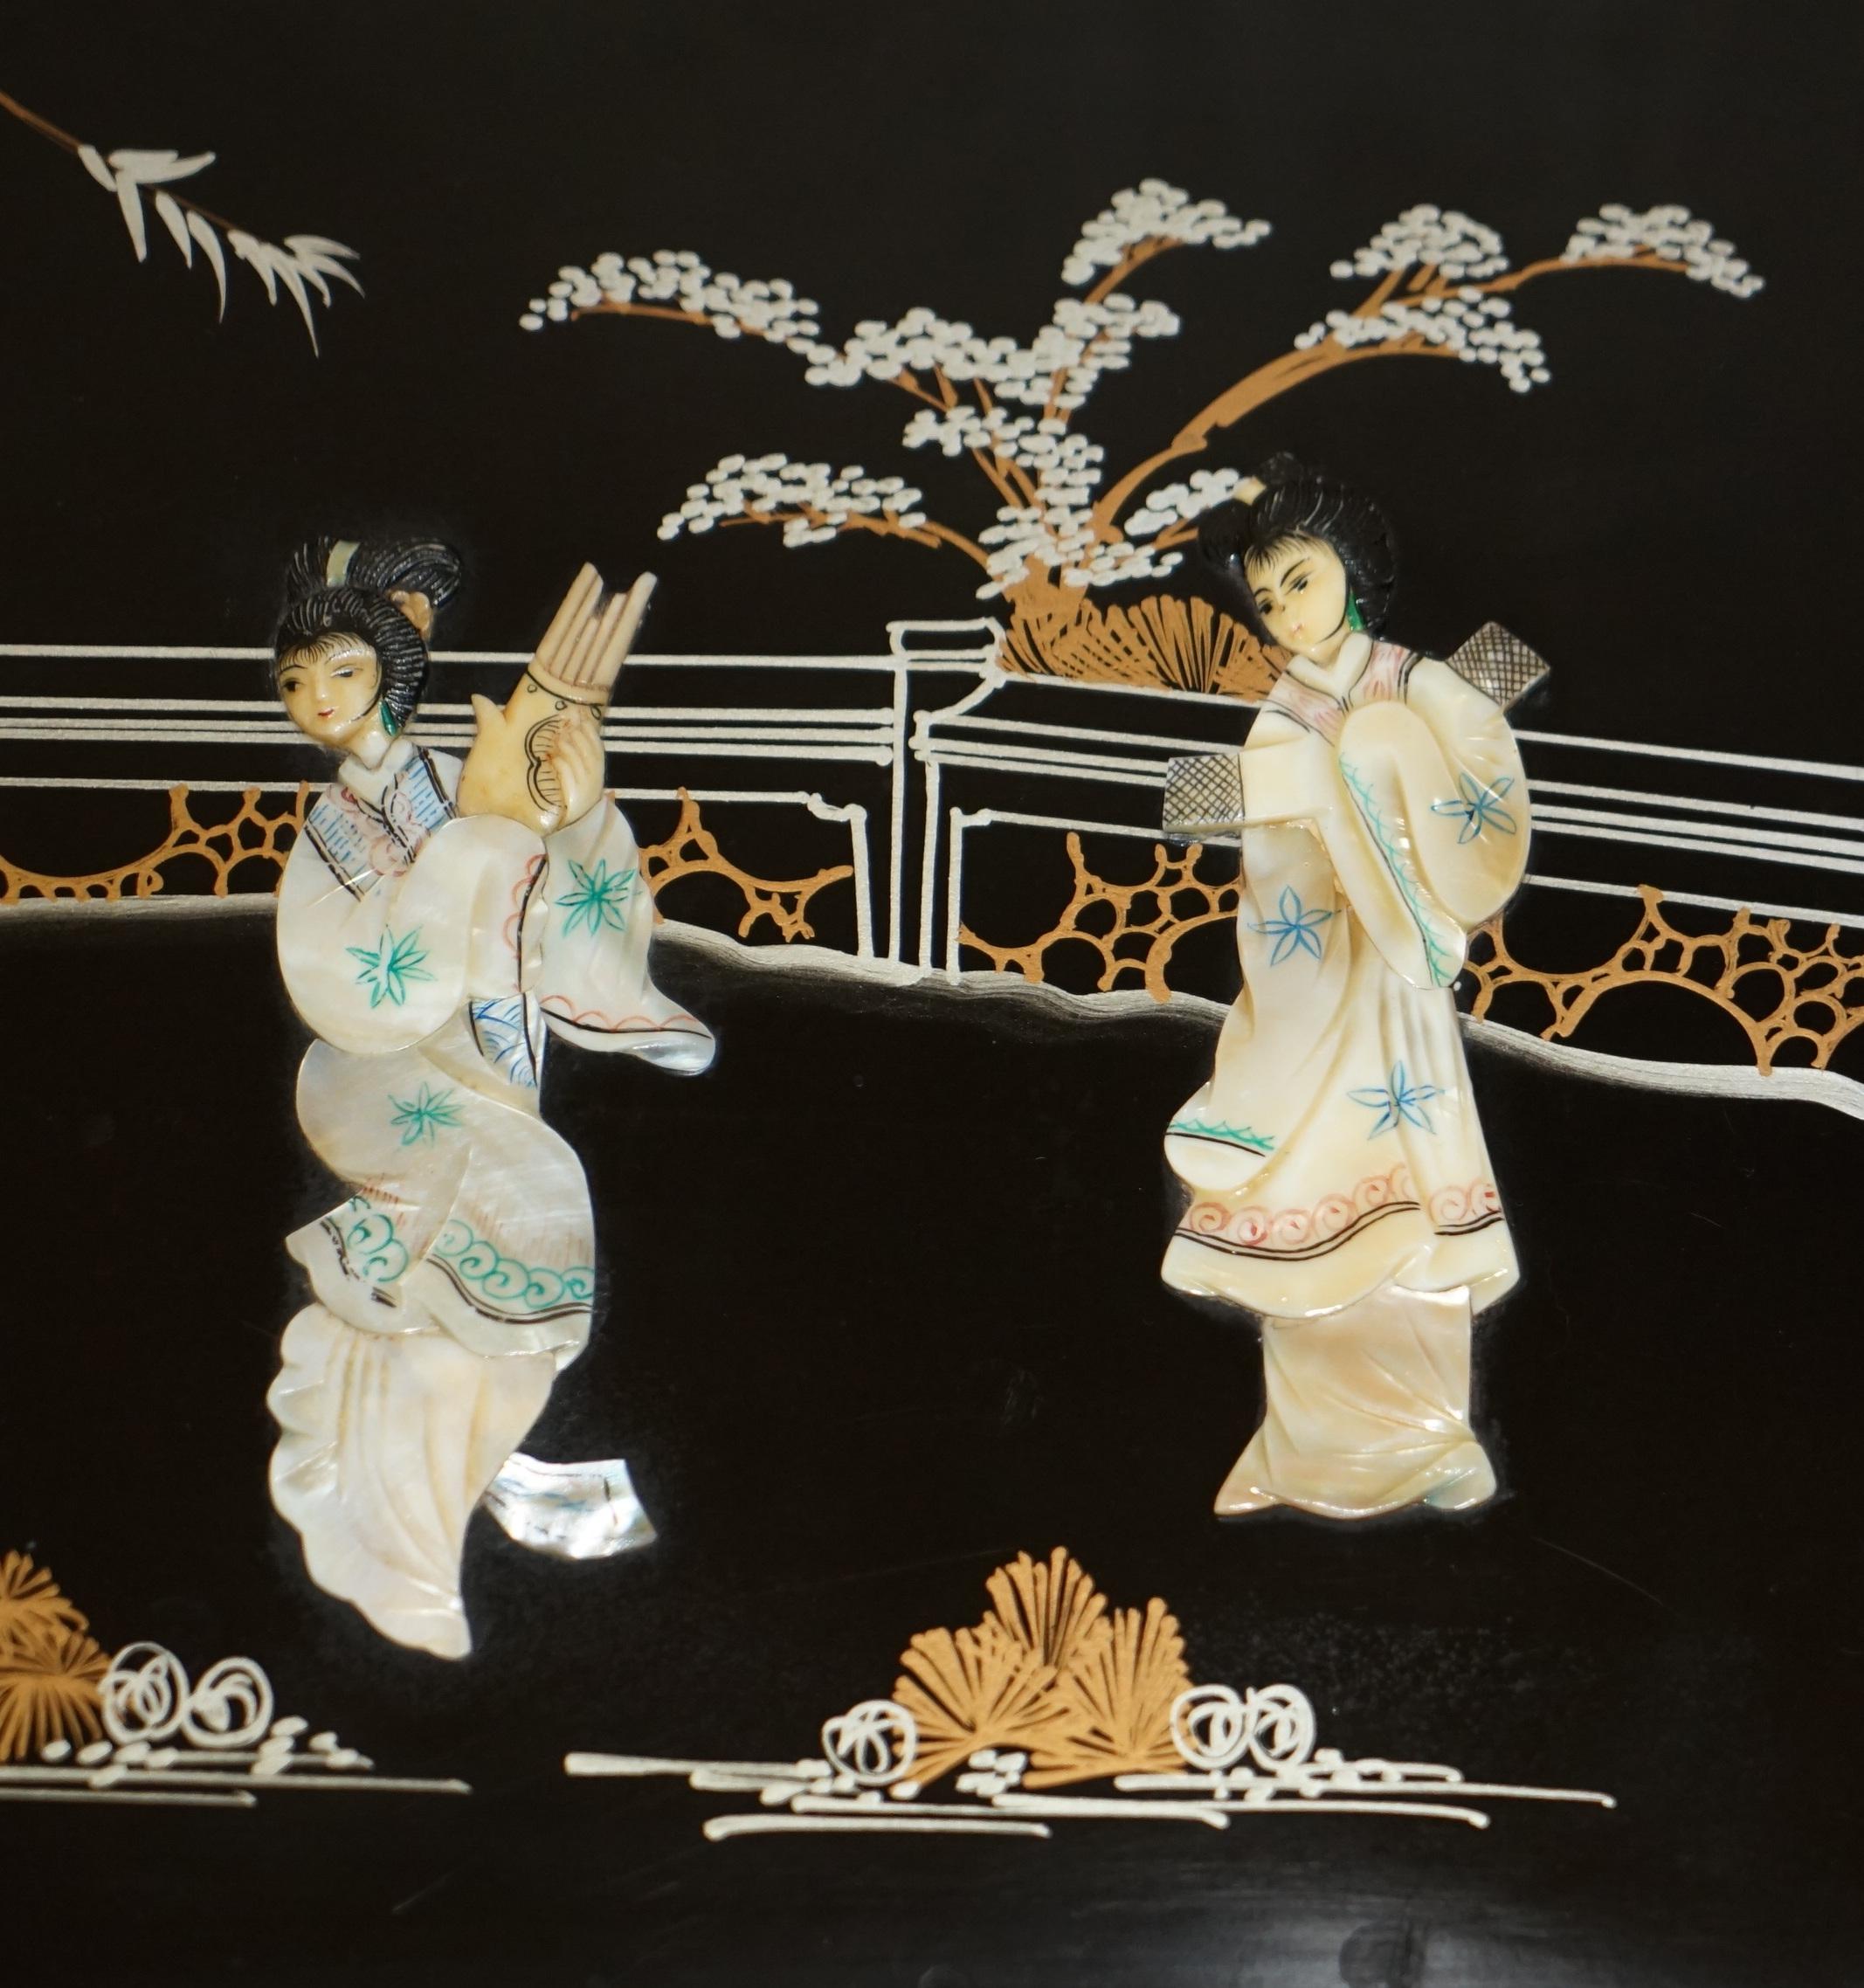 Stunning CHINOISERIE GEISHA GIRLS LACQUER SiDE CABINET SOAPSTONE en vente 5